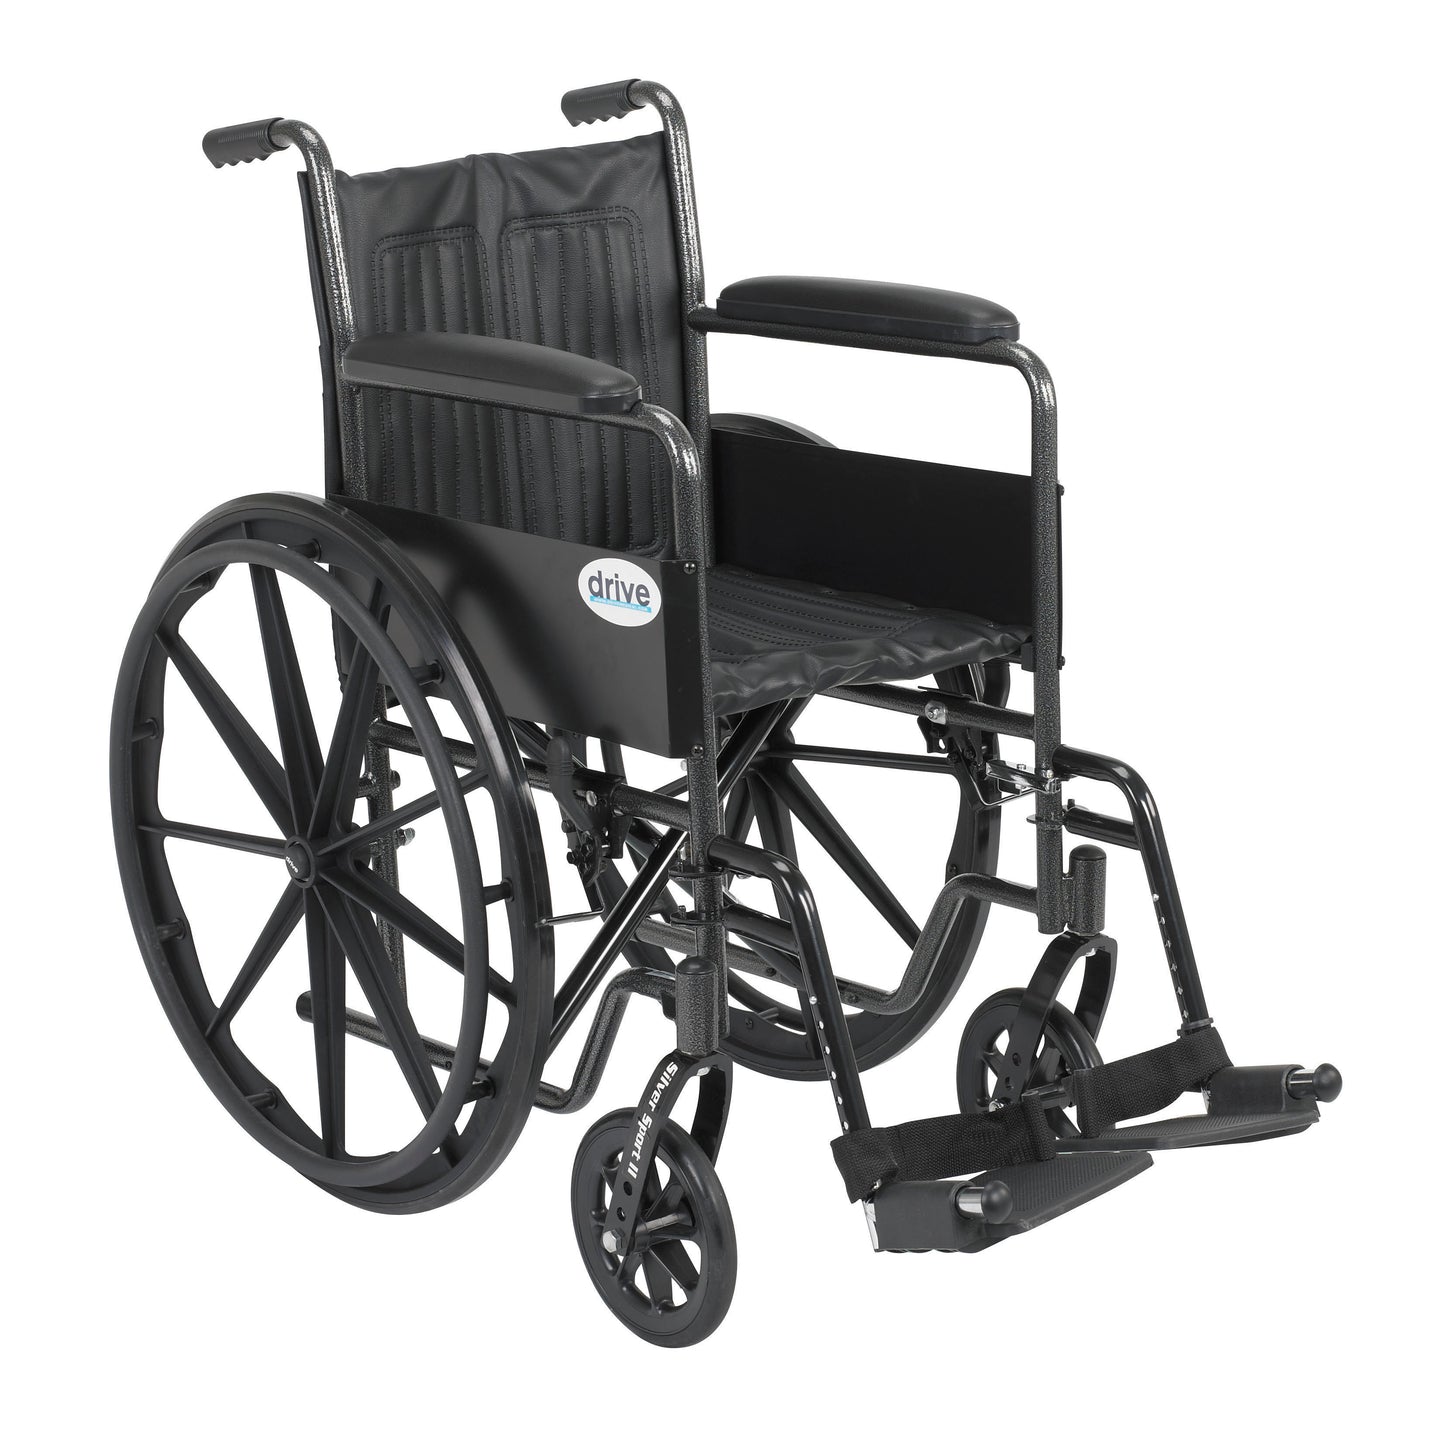 Silver Sport 2 Wheelchair, Non Removable Fixed Arms, Swing away Footrests, 18" Seat